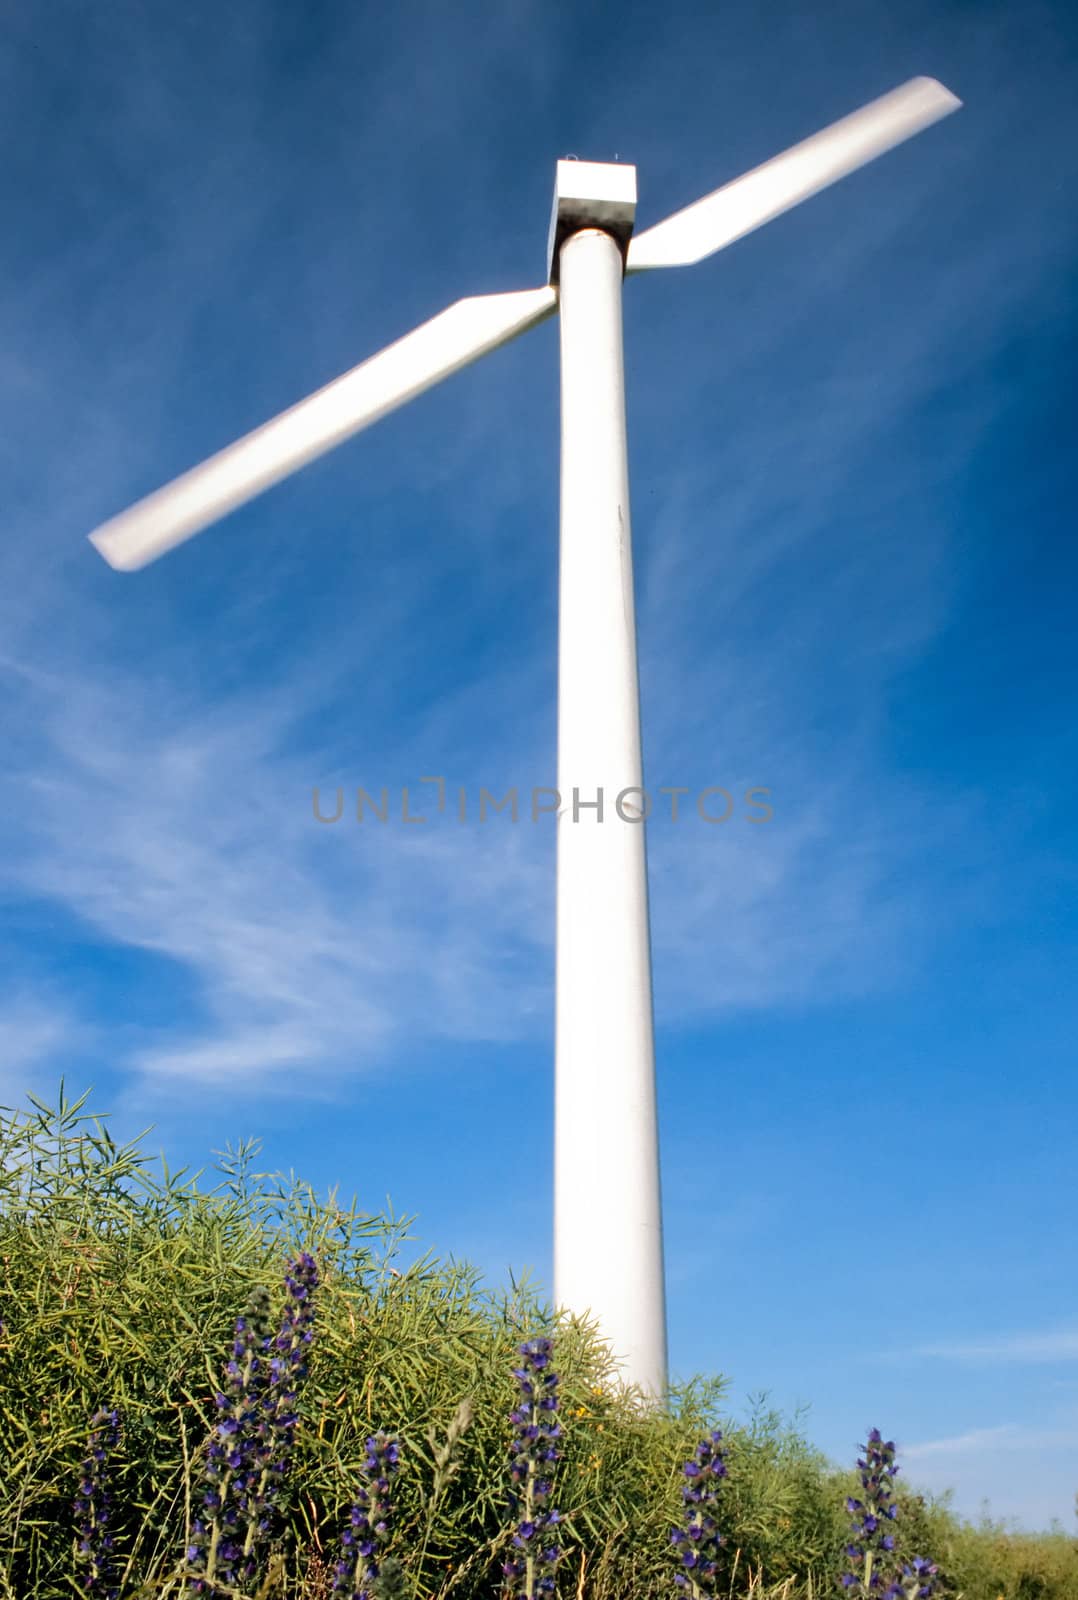 Wind turbine on agricultural land by PiLens